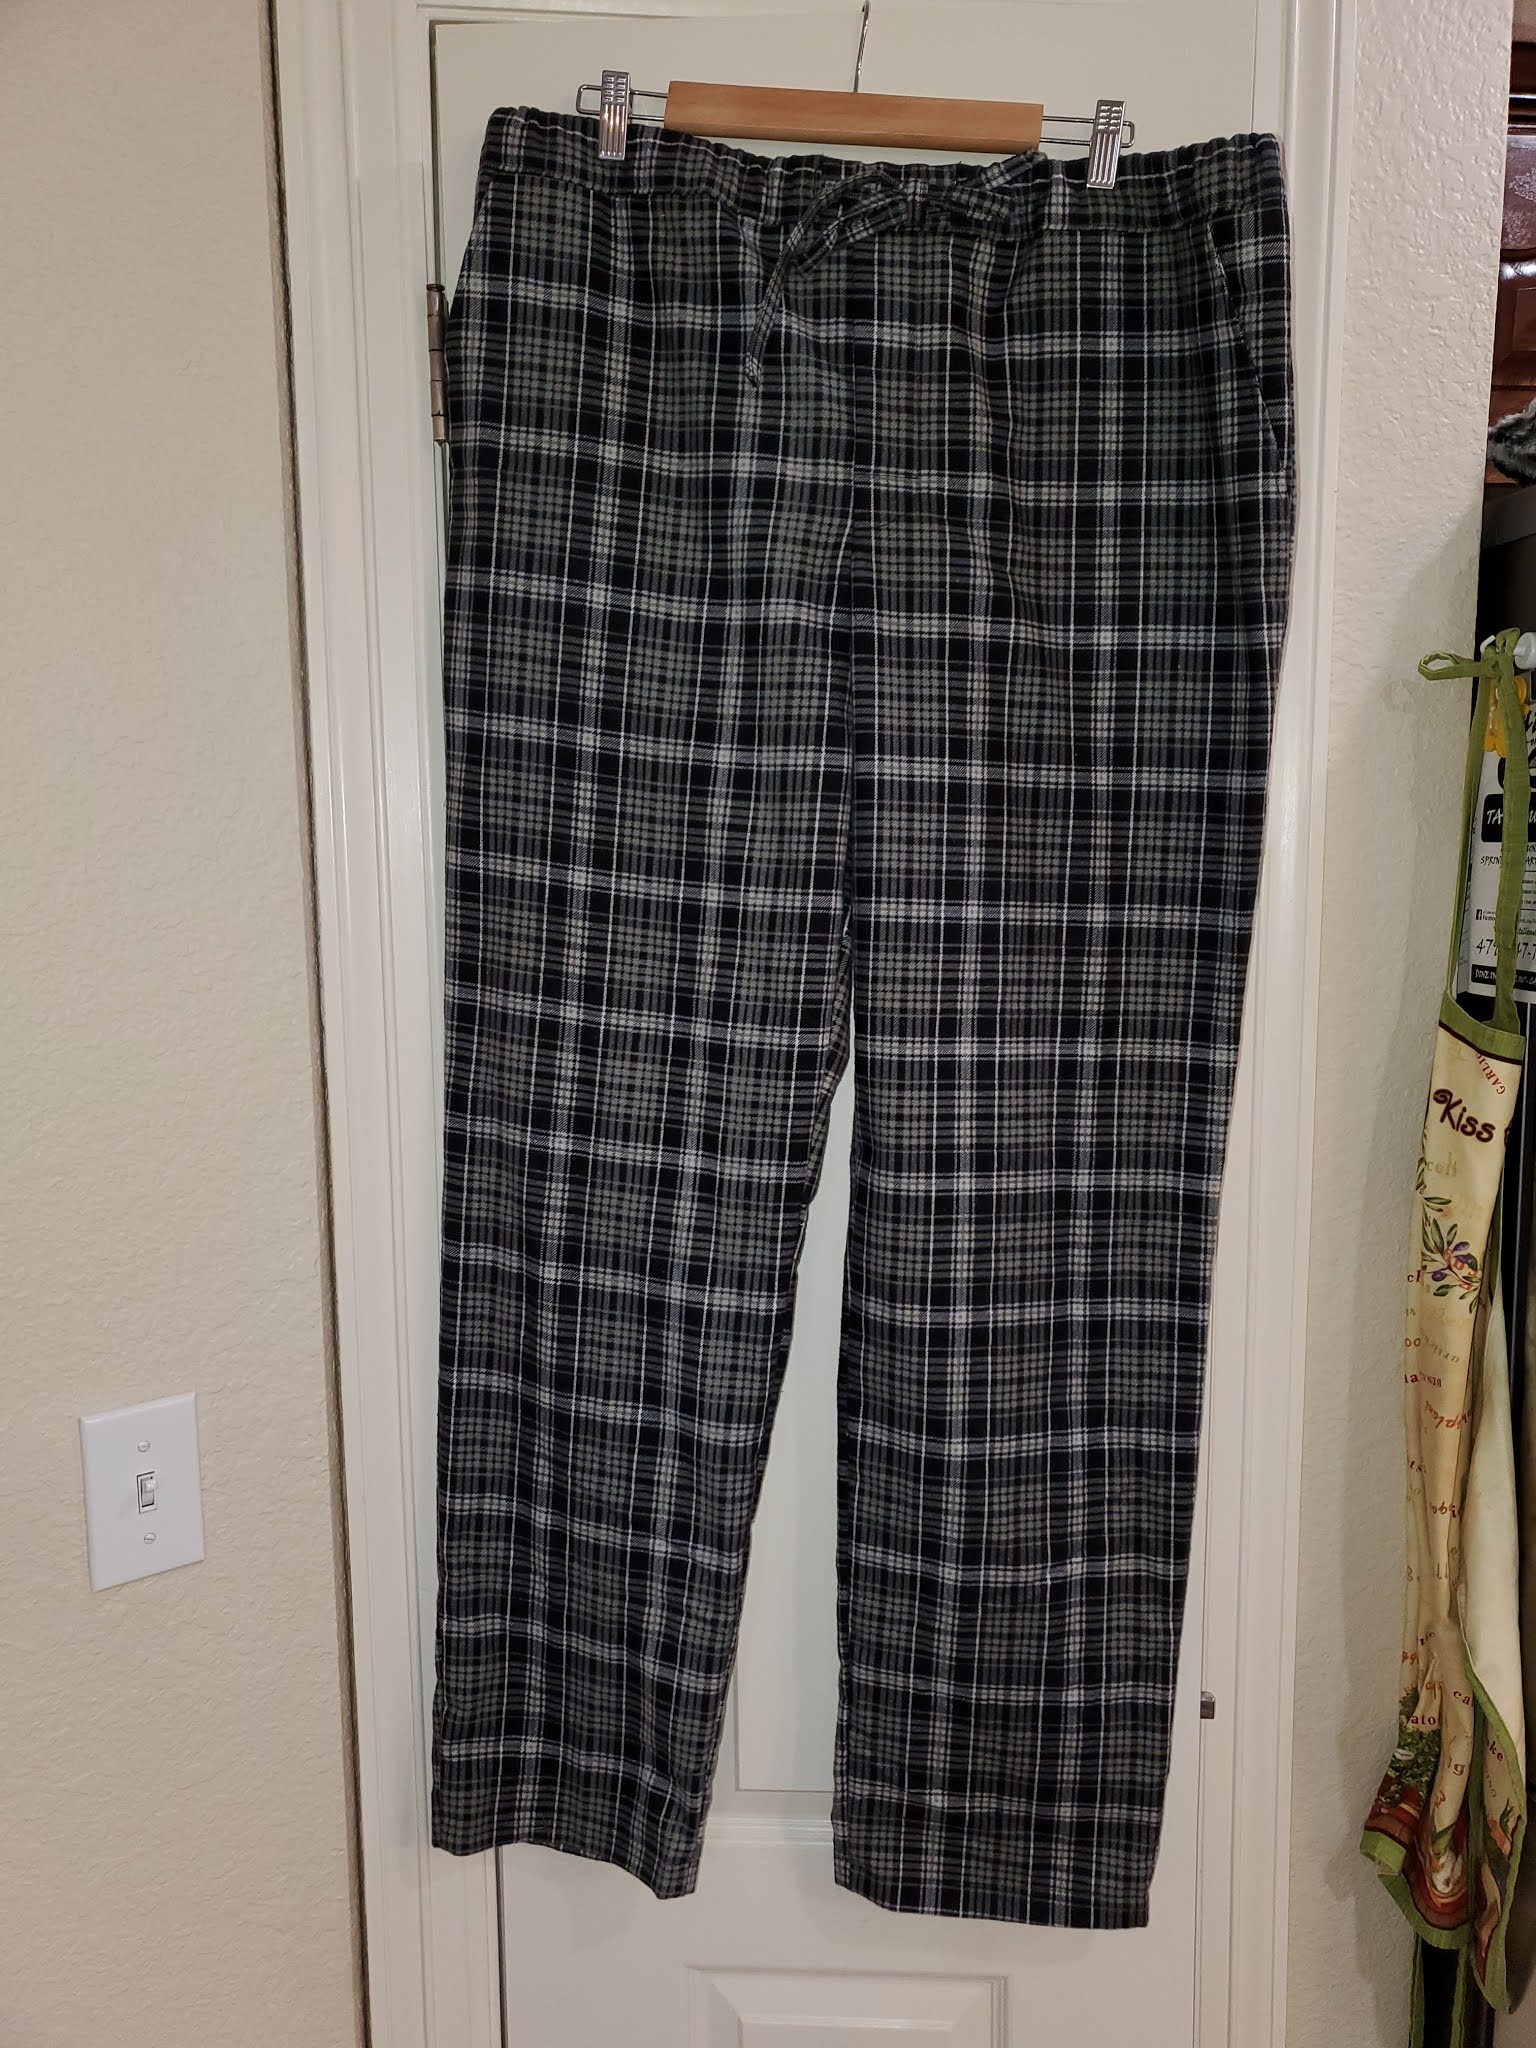 Sewing Daily: 2019-2021 Projects